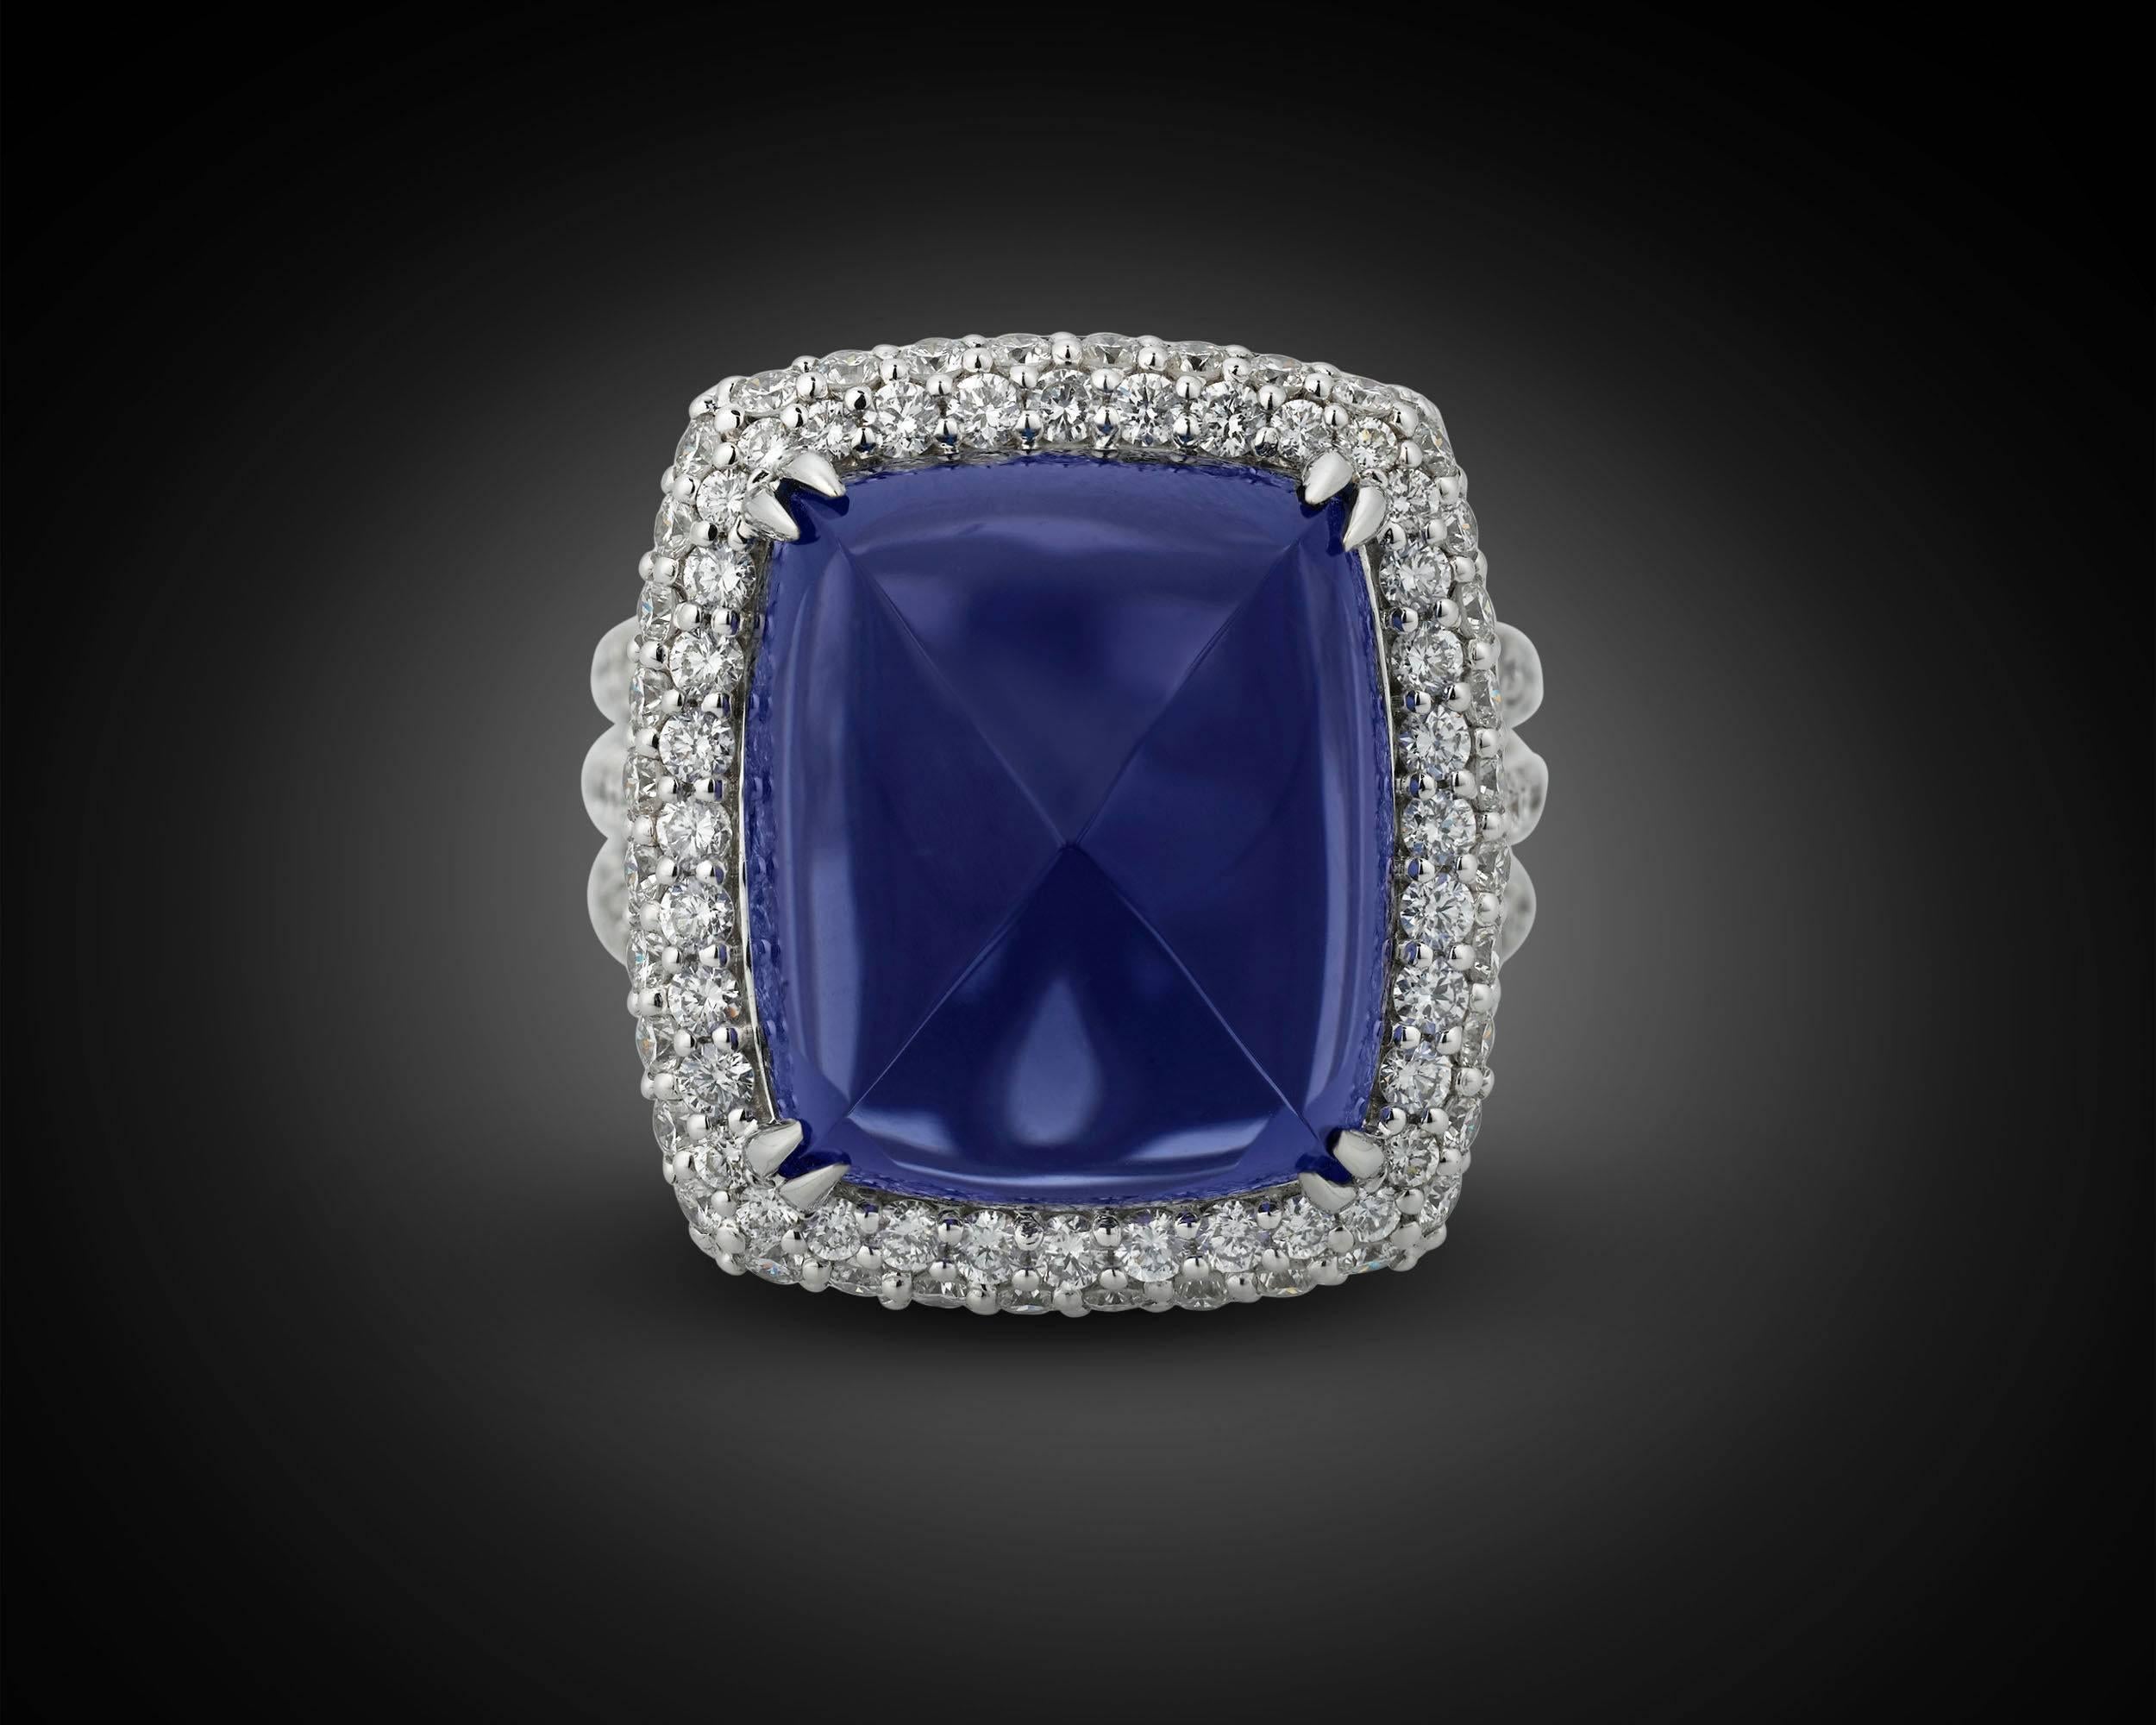 The striking and rare sugarloaf tanzanite in this breathtaking ring boasts the perfect, violetish-blue hue for which the best of these gems are so coveted. Weighing a striking 22.10 carats, this stone is perfectly complemented by 2.51 carats of